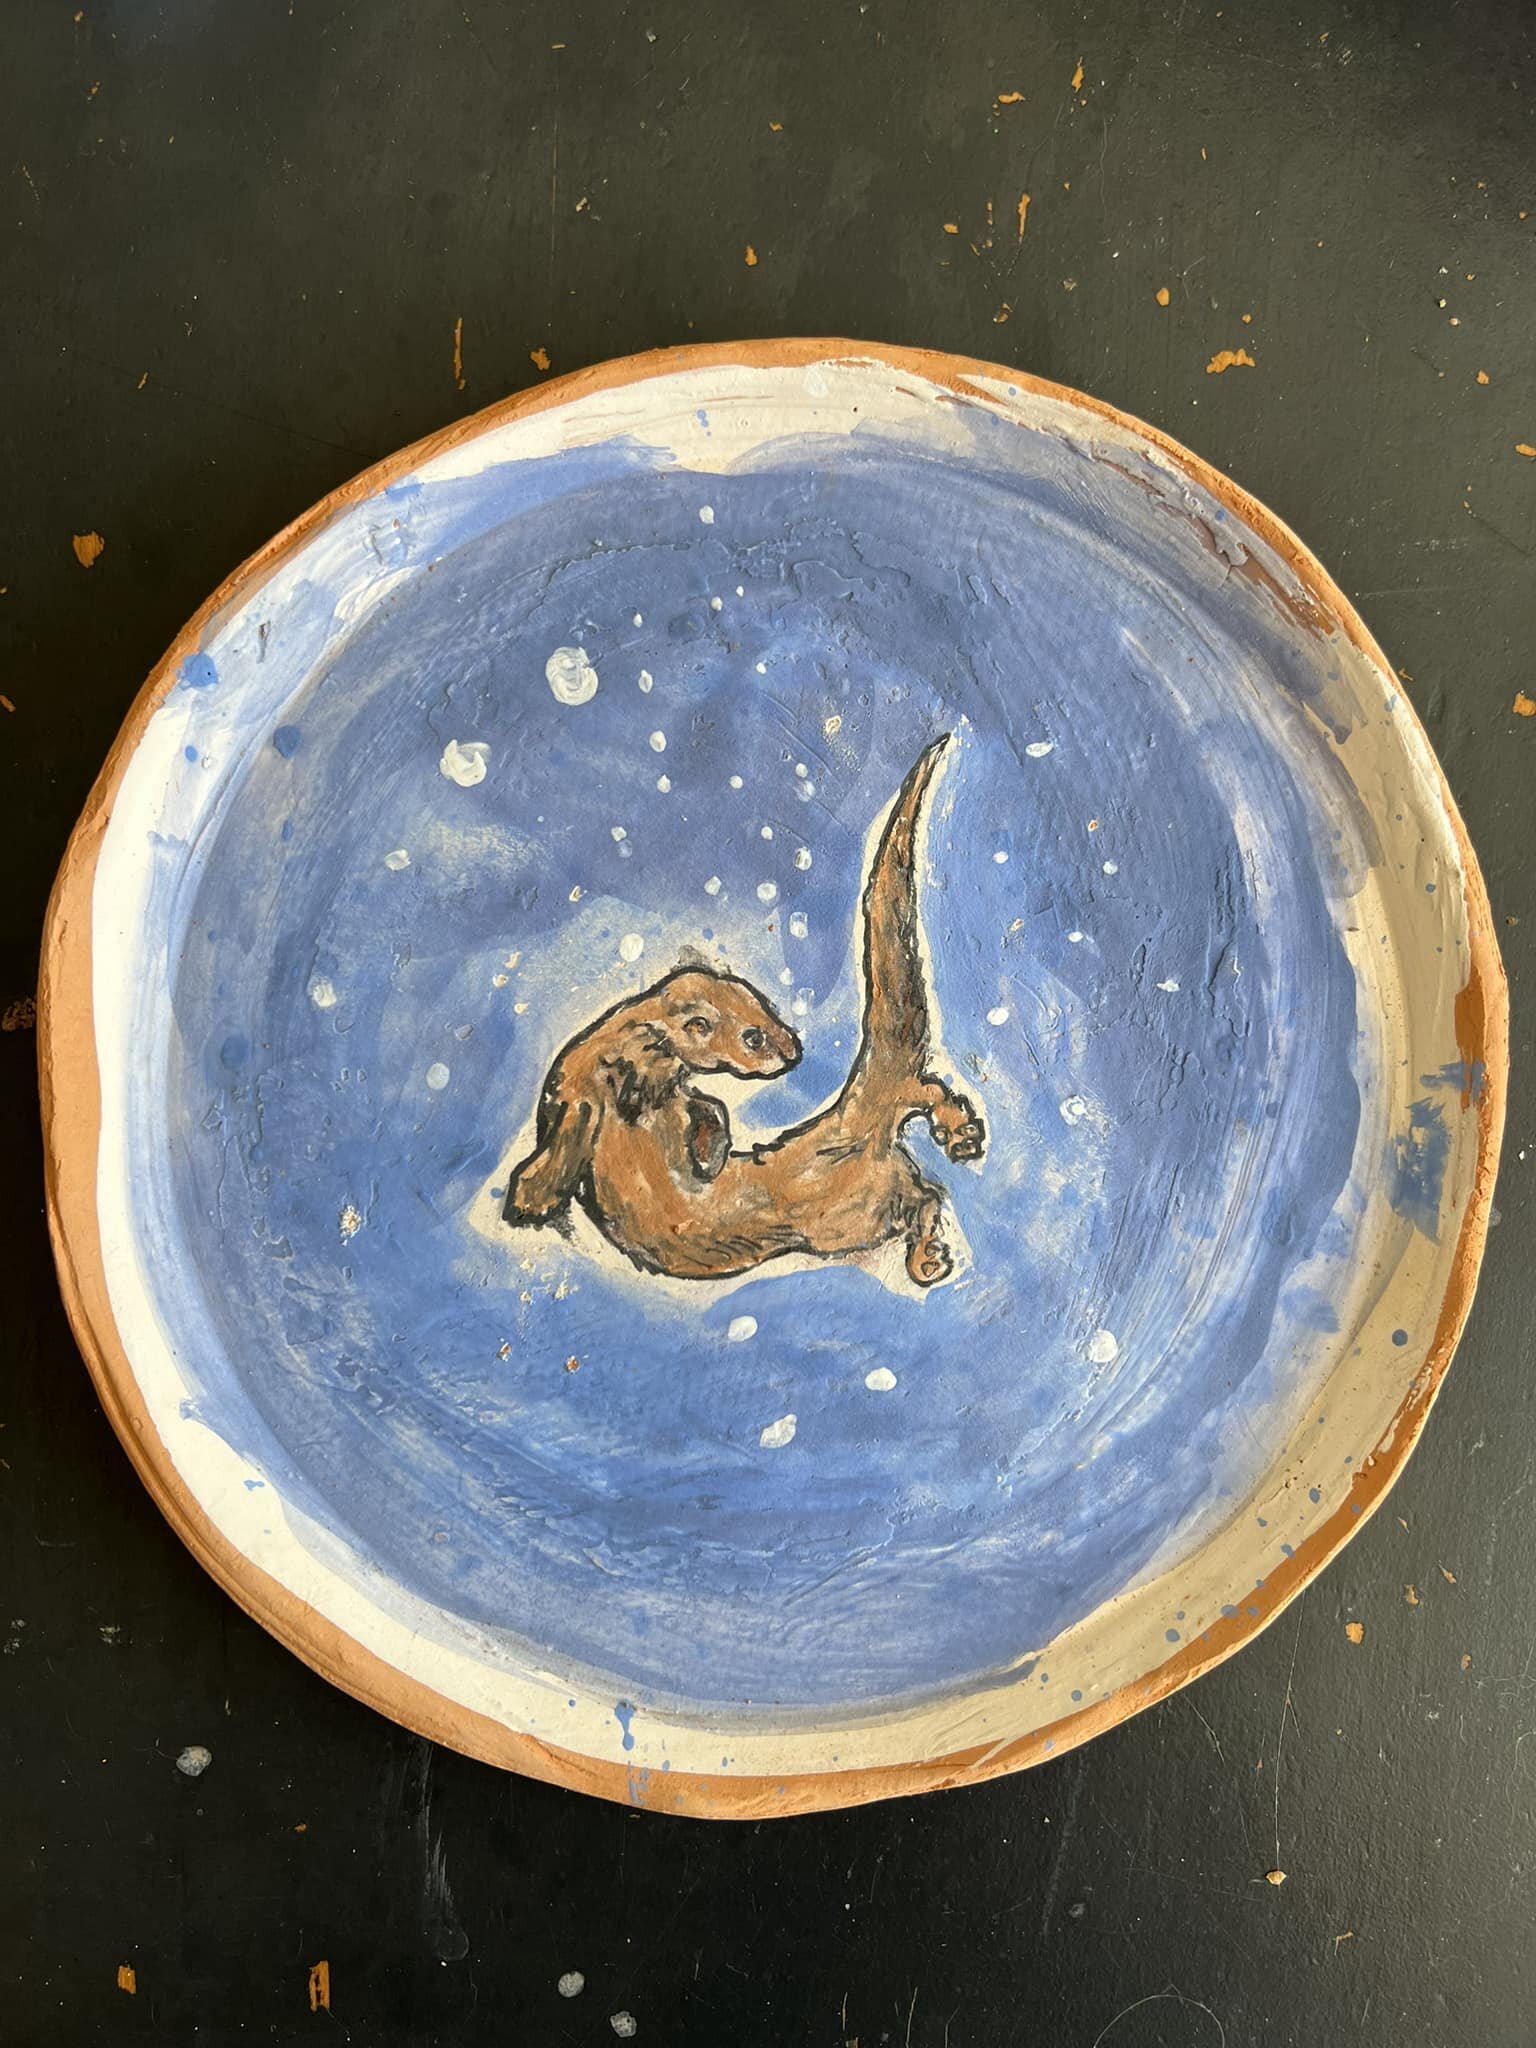 Ok this otter has got to be one of my favorite plate designs. I think I&rsquo;ll do a whole set w different otters doing otter things 🤣💕